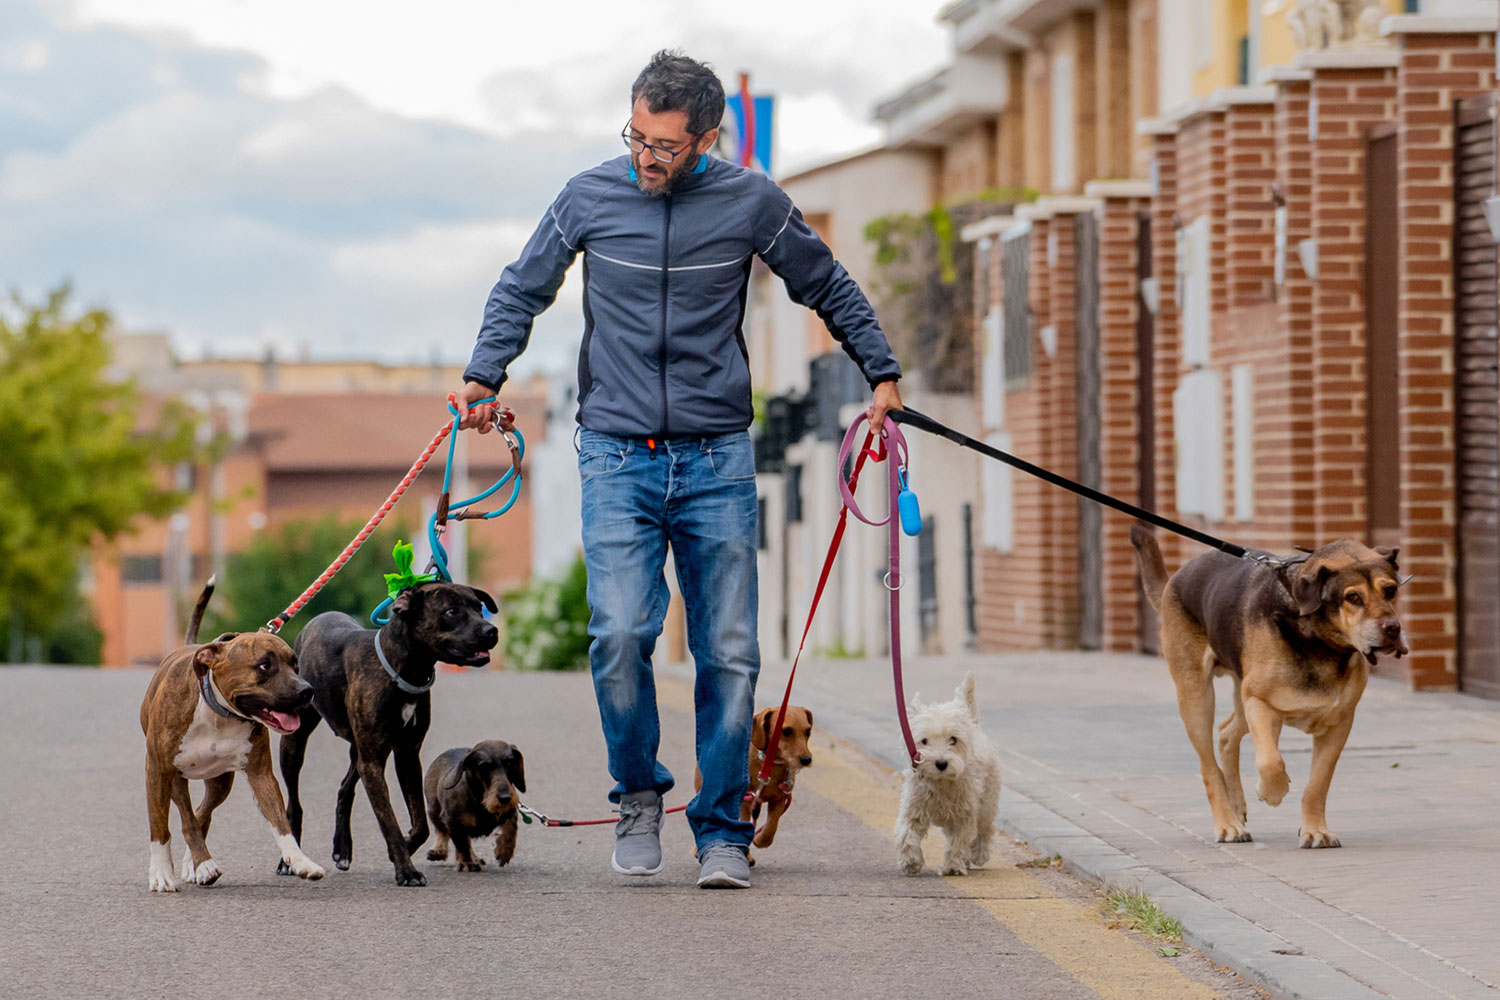 A man walks several dogs to earn extra income